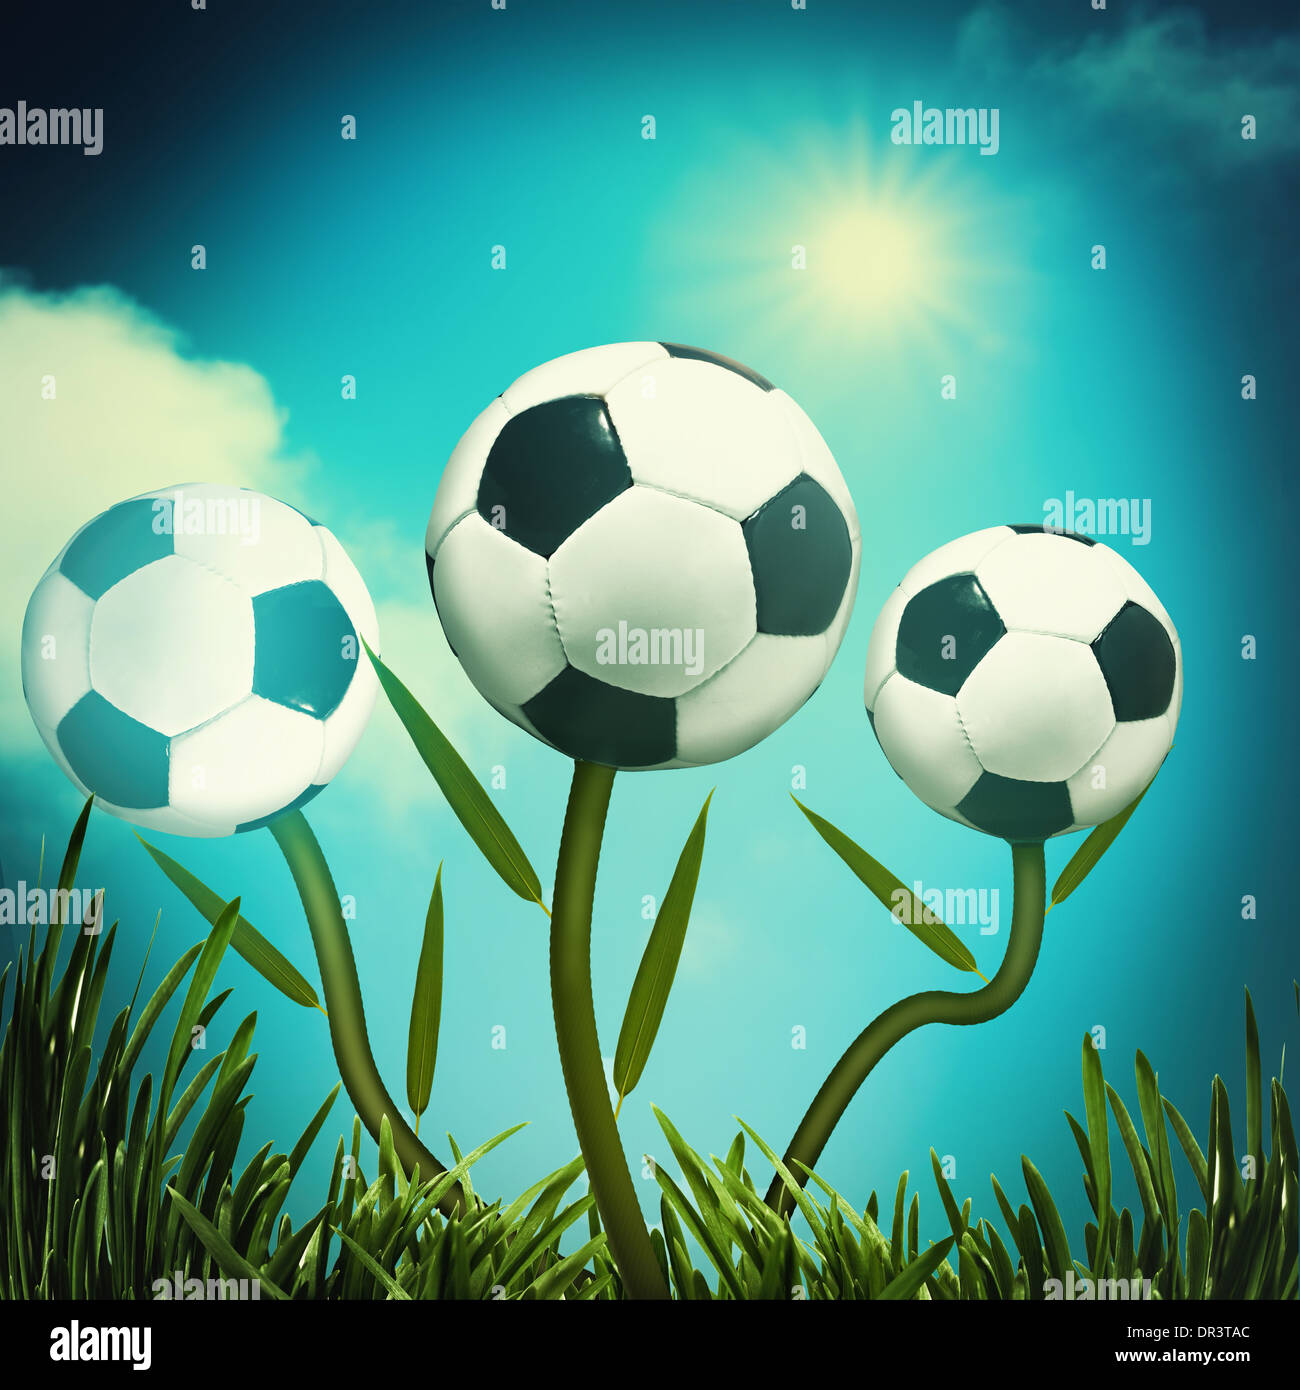 Funny football and soccer backgrounds for your design Stock Photo - Alamy